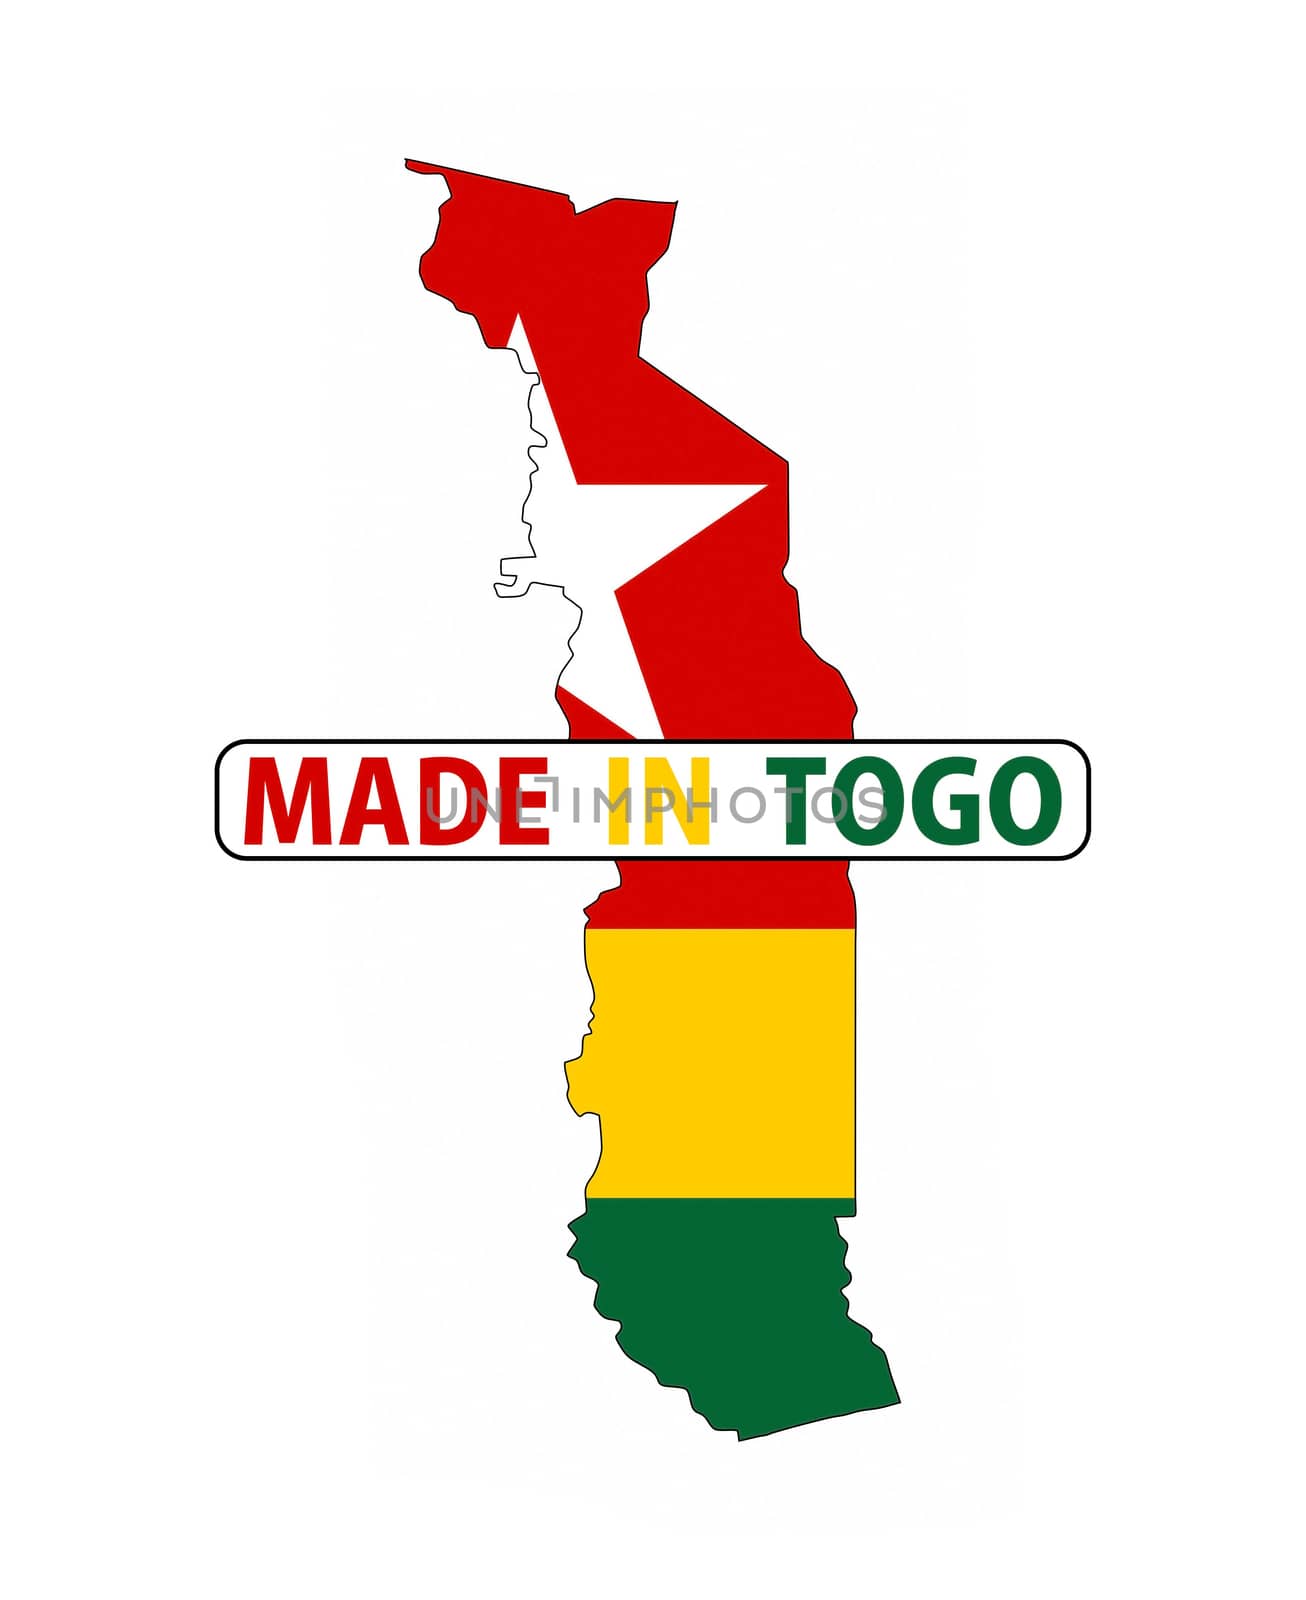 made in togo by tony4urban